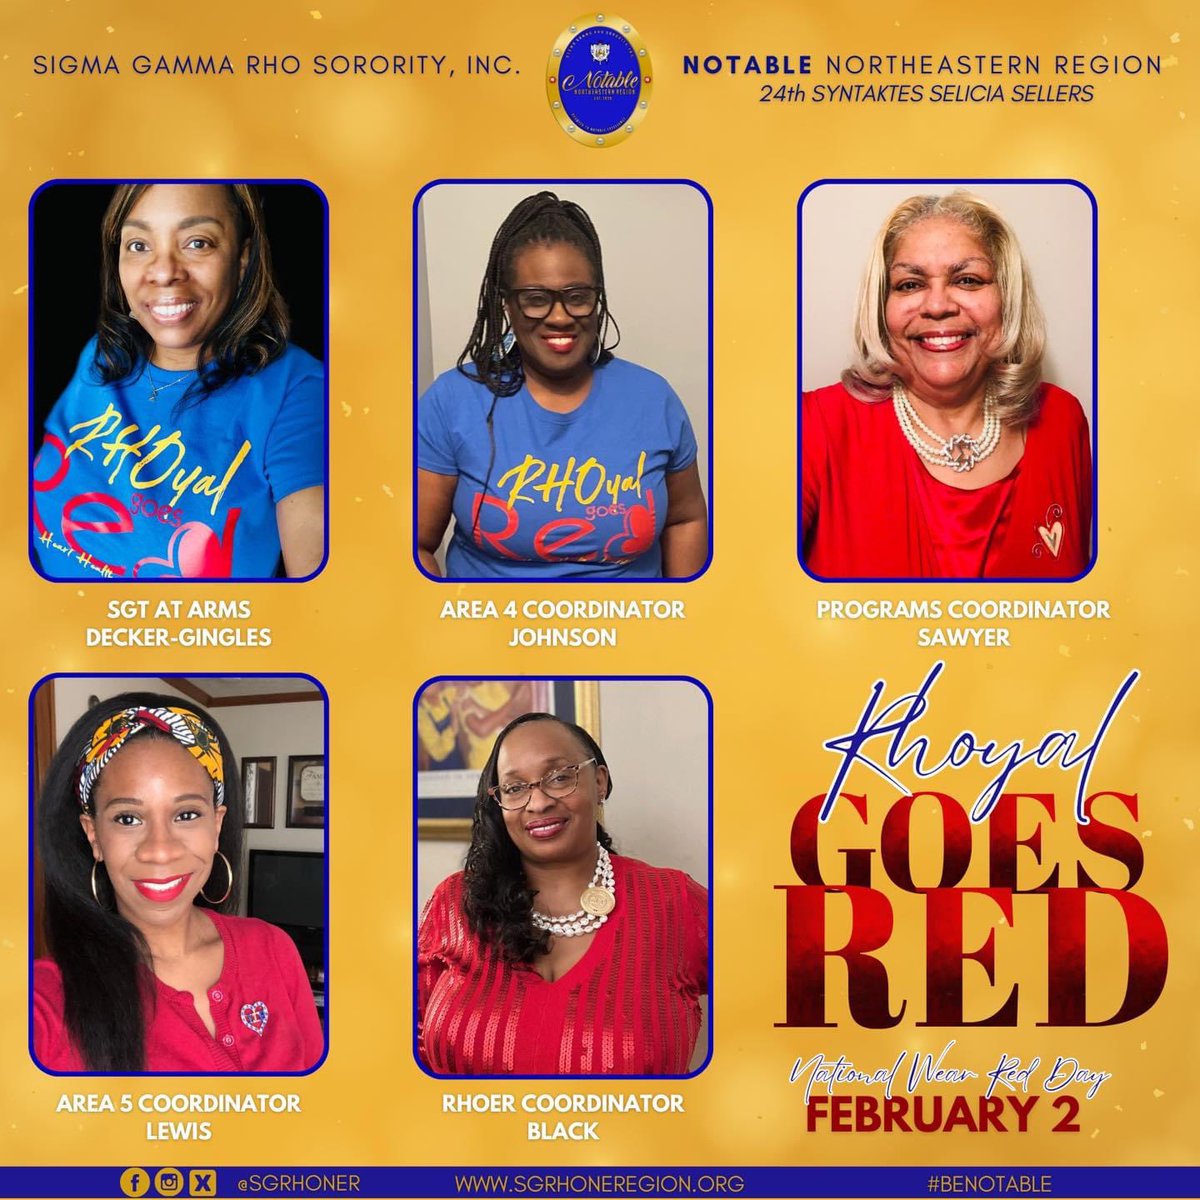 The Rhoyal Women of Sigma Gamma Rho Sorority, Inc. in the Northeastern Region are wearing red to focus on raising awareness to eradicate cardiovascular risks and diseases in women❤️💛💙

#SGRhoNER #BeNOTABLE #SigmaGammaRho #Greater #GreaterServiceGreaterProgress #womenswellness